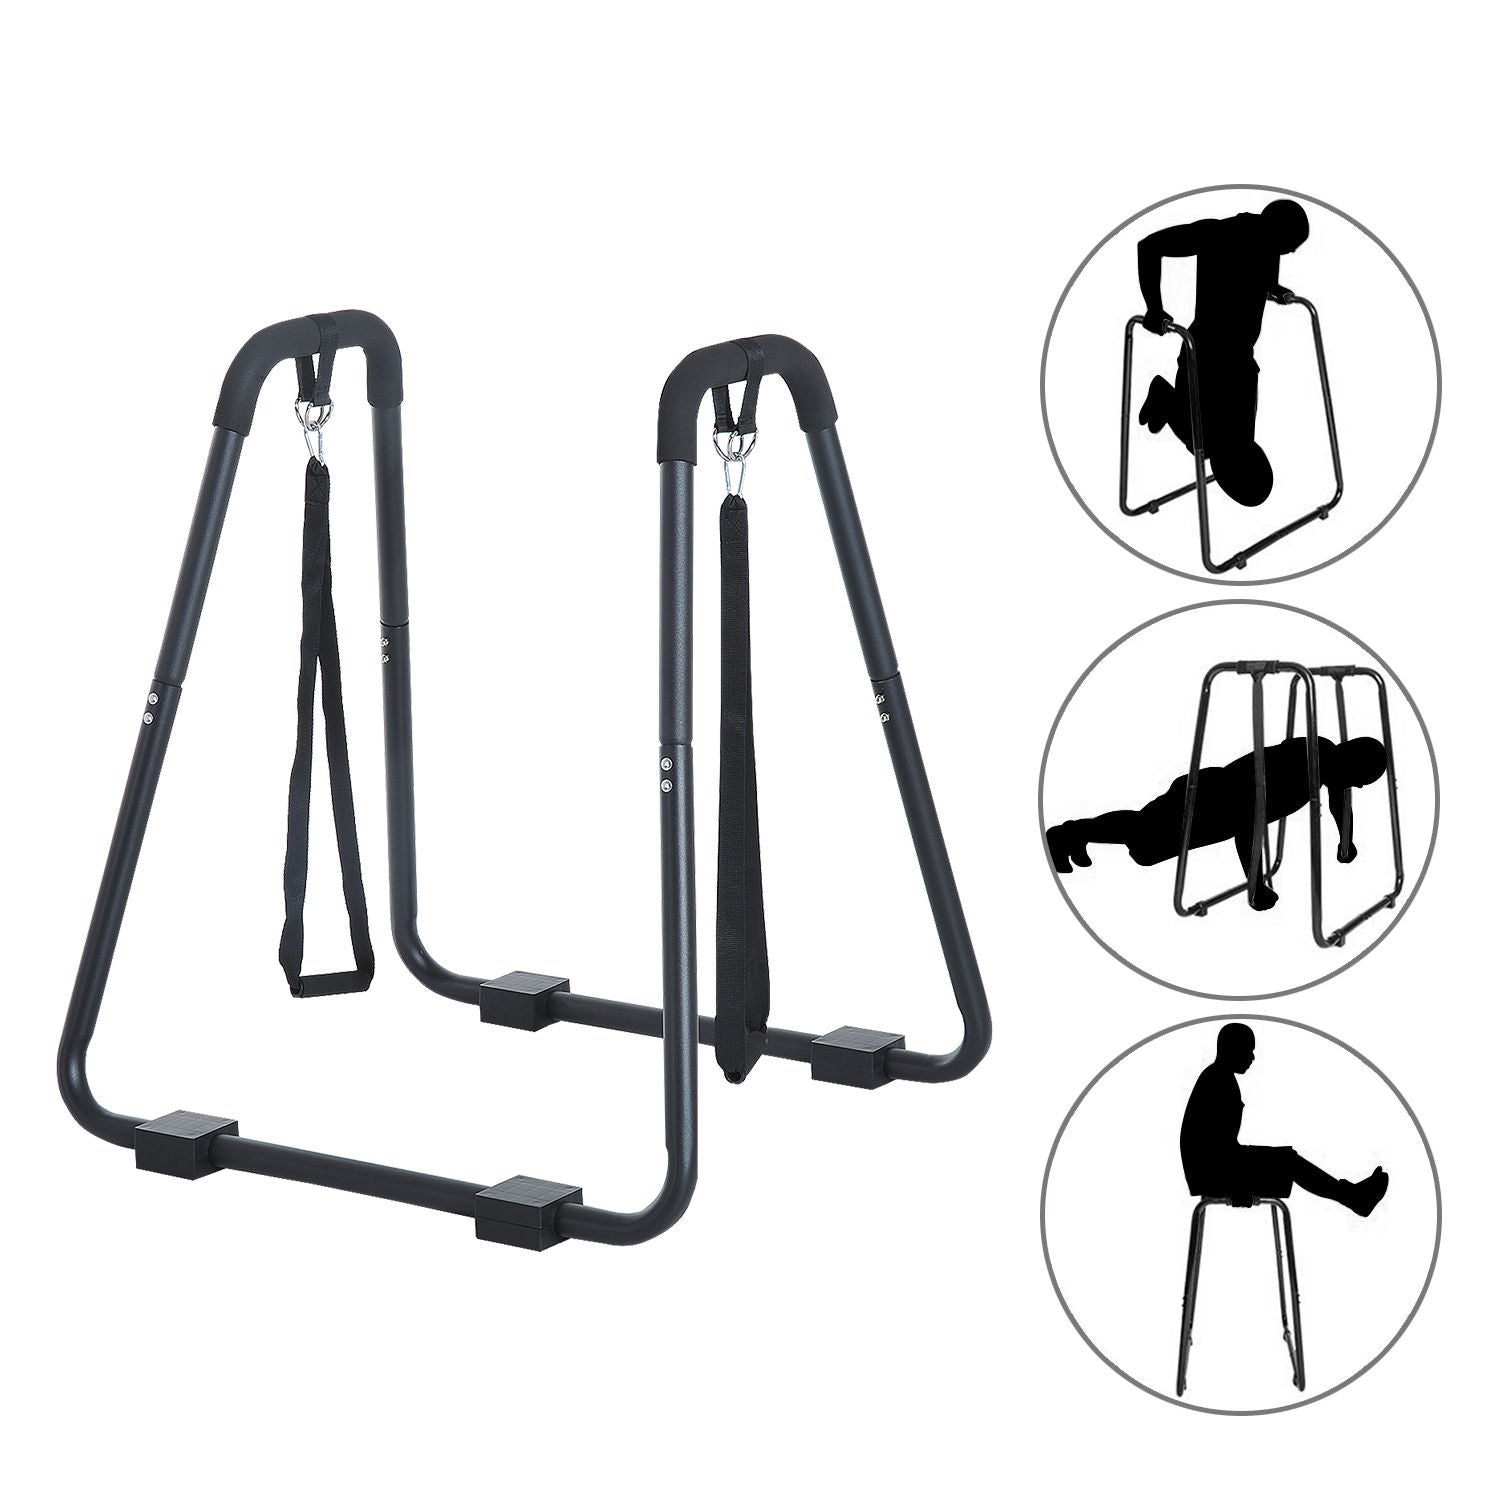 Nancy's Asquith Dip Station - Dip Stand - Dips with sling trainer